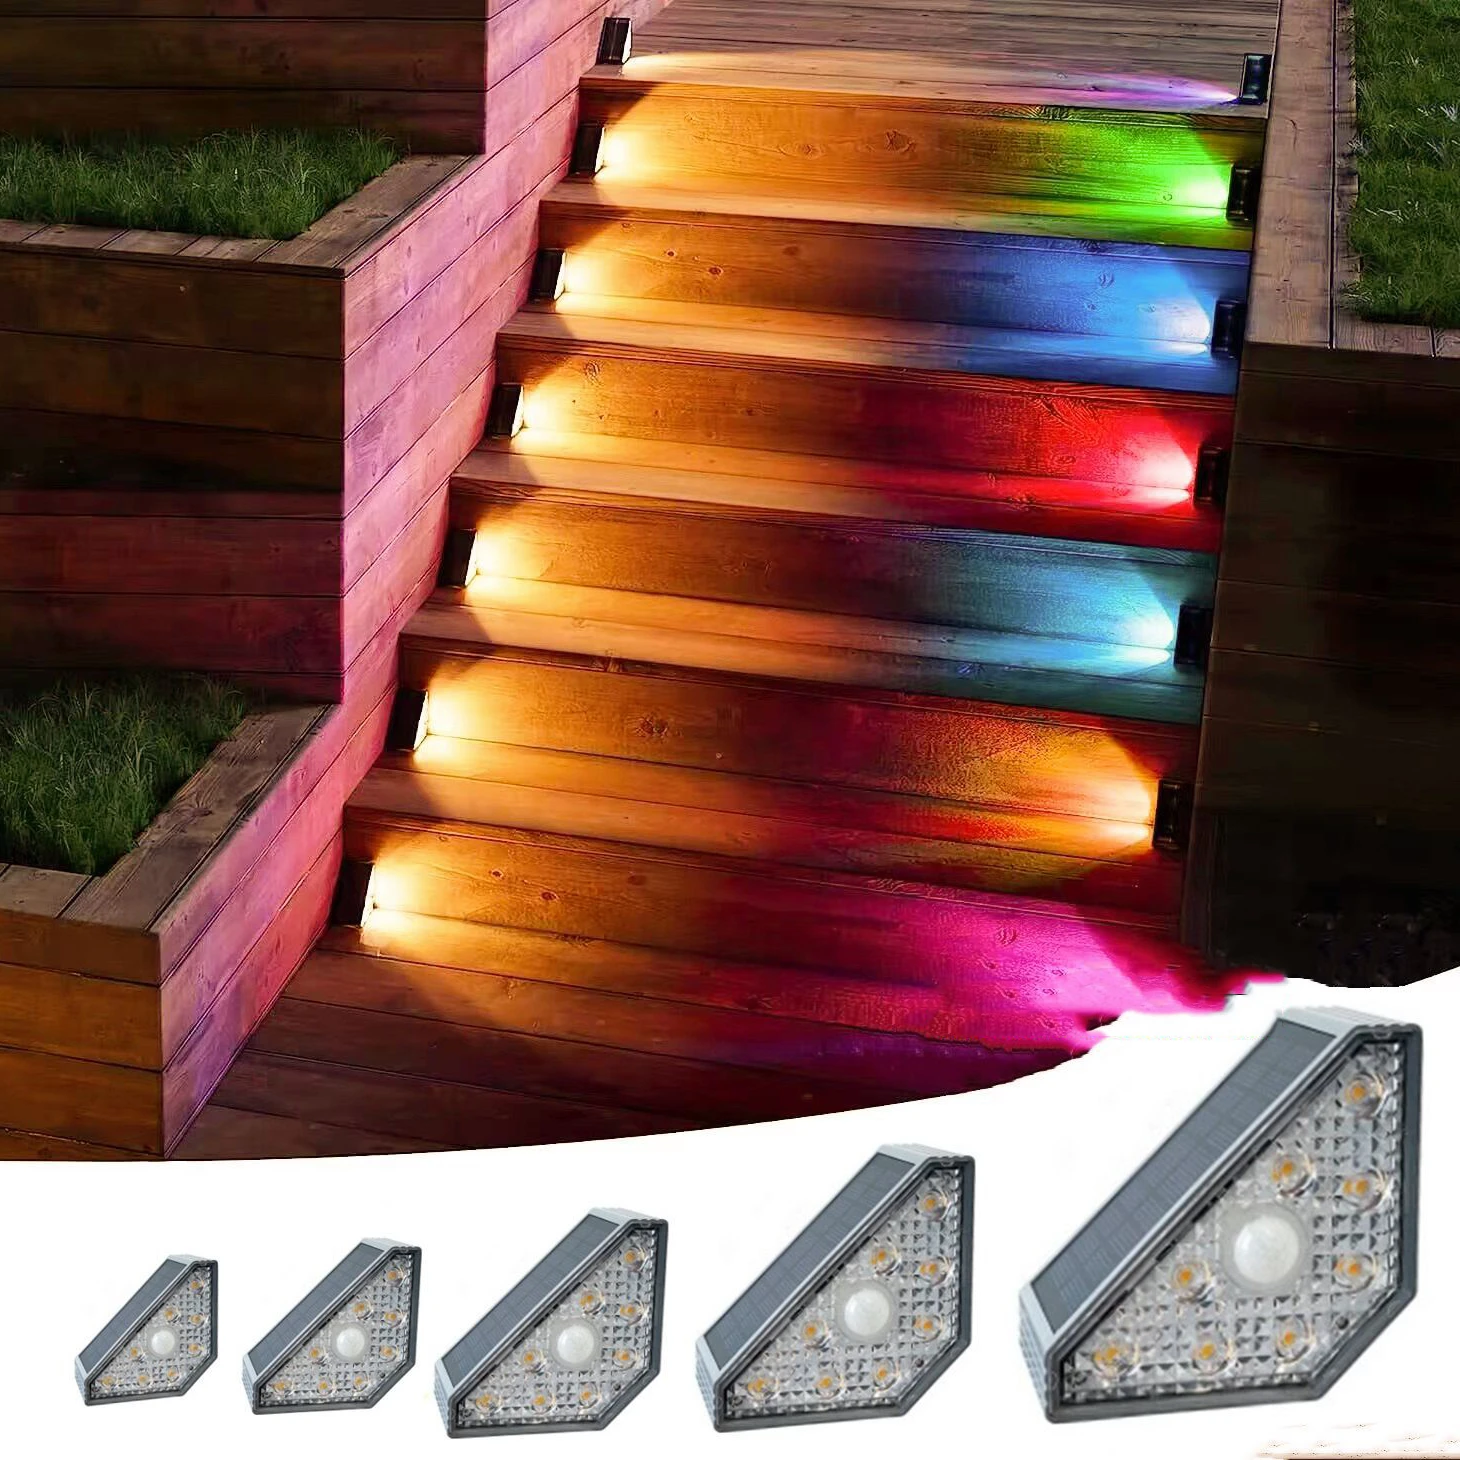 solar led stair light with motion sensor outdoor step 3 mode lighting ip67 decorative light for patio garden solar panel lamps Solar LED Stair Light with Motion Sensor LED Step 3 Mode RGB Lighting IP67 Decorative Light for Patio Garden Solar Panel Lamps